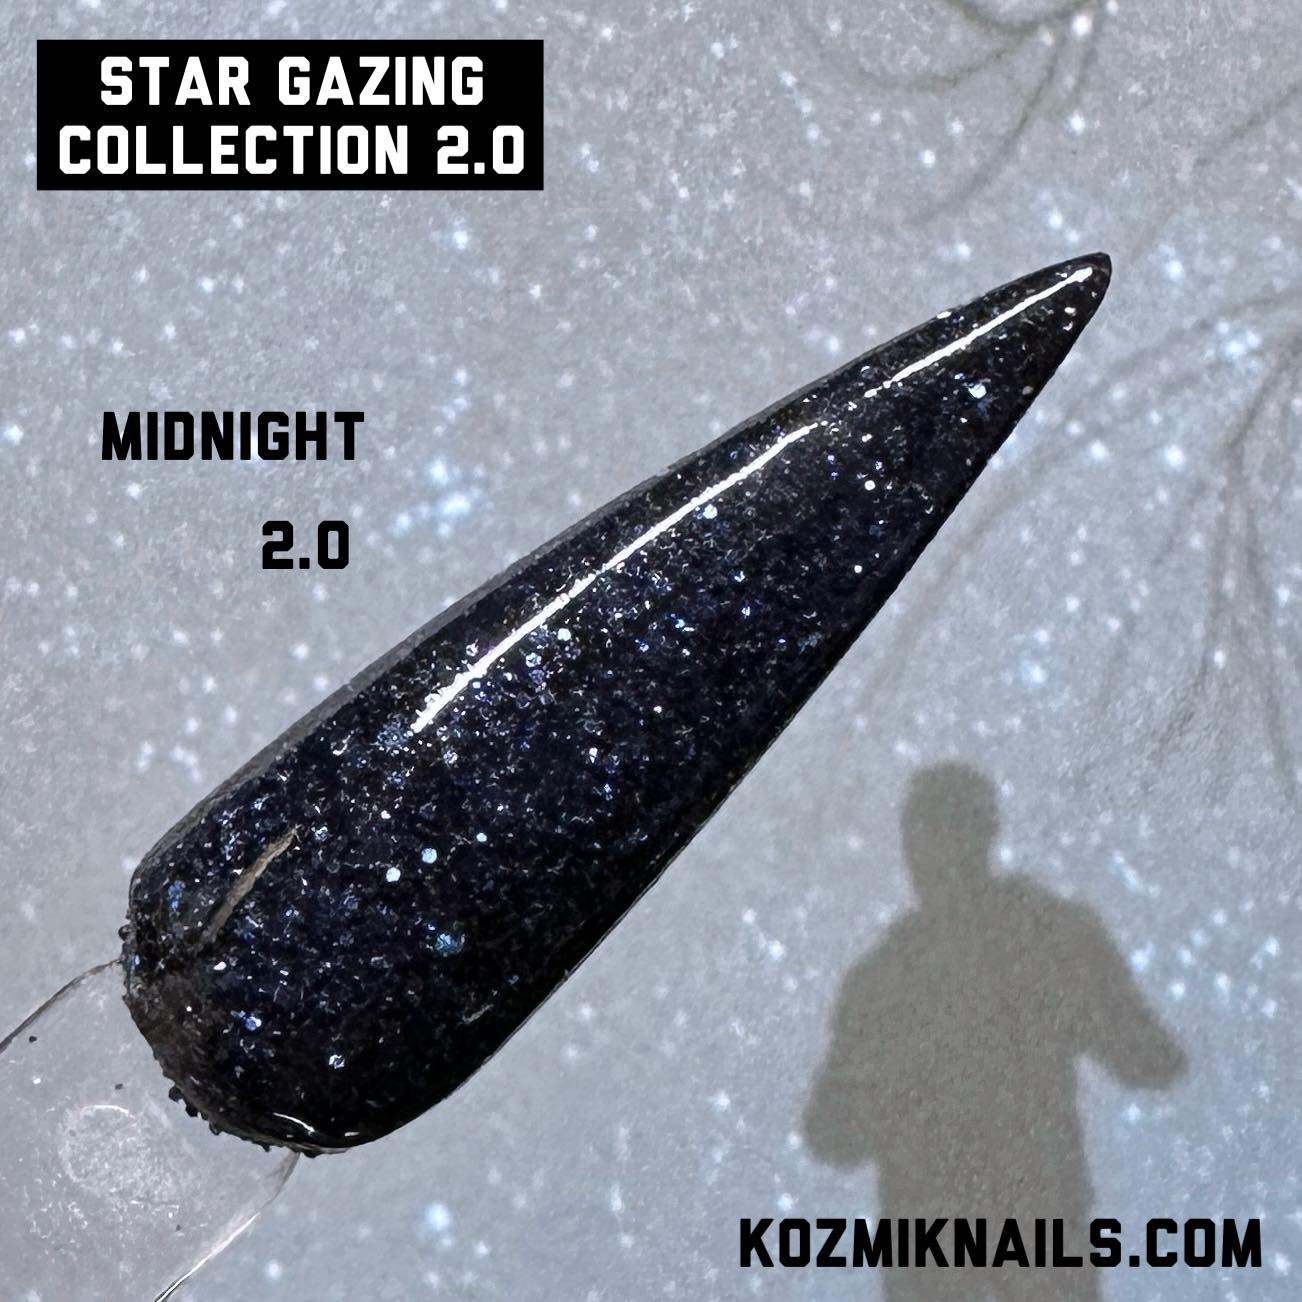 Star Gazing Collection 2.0